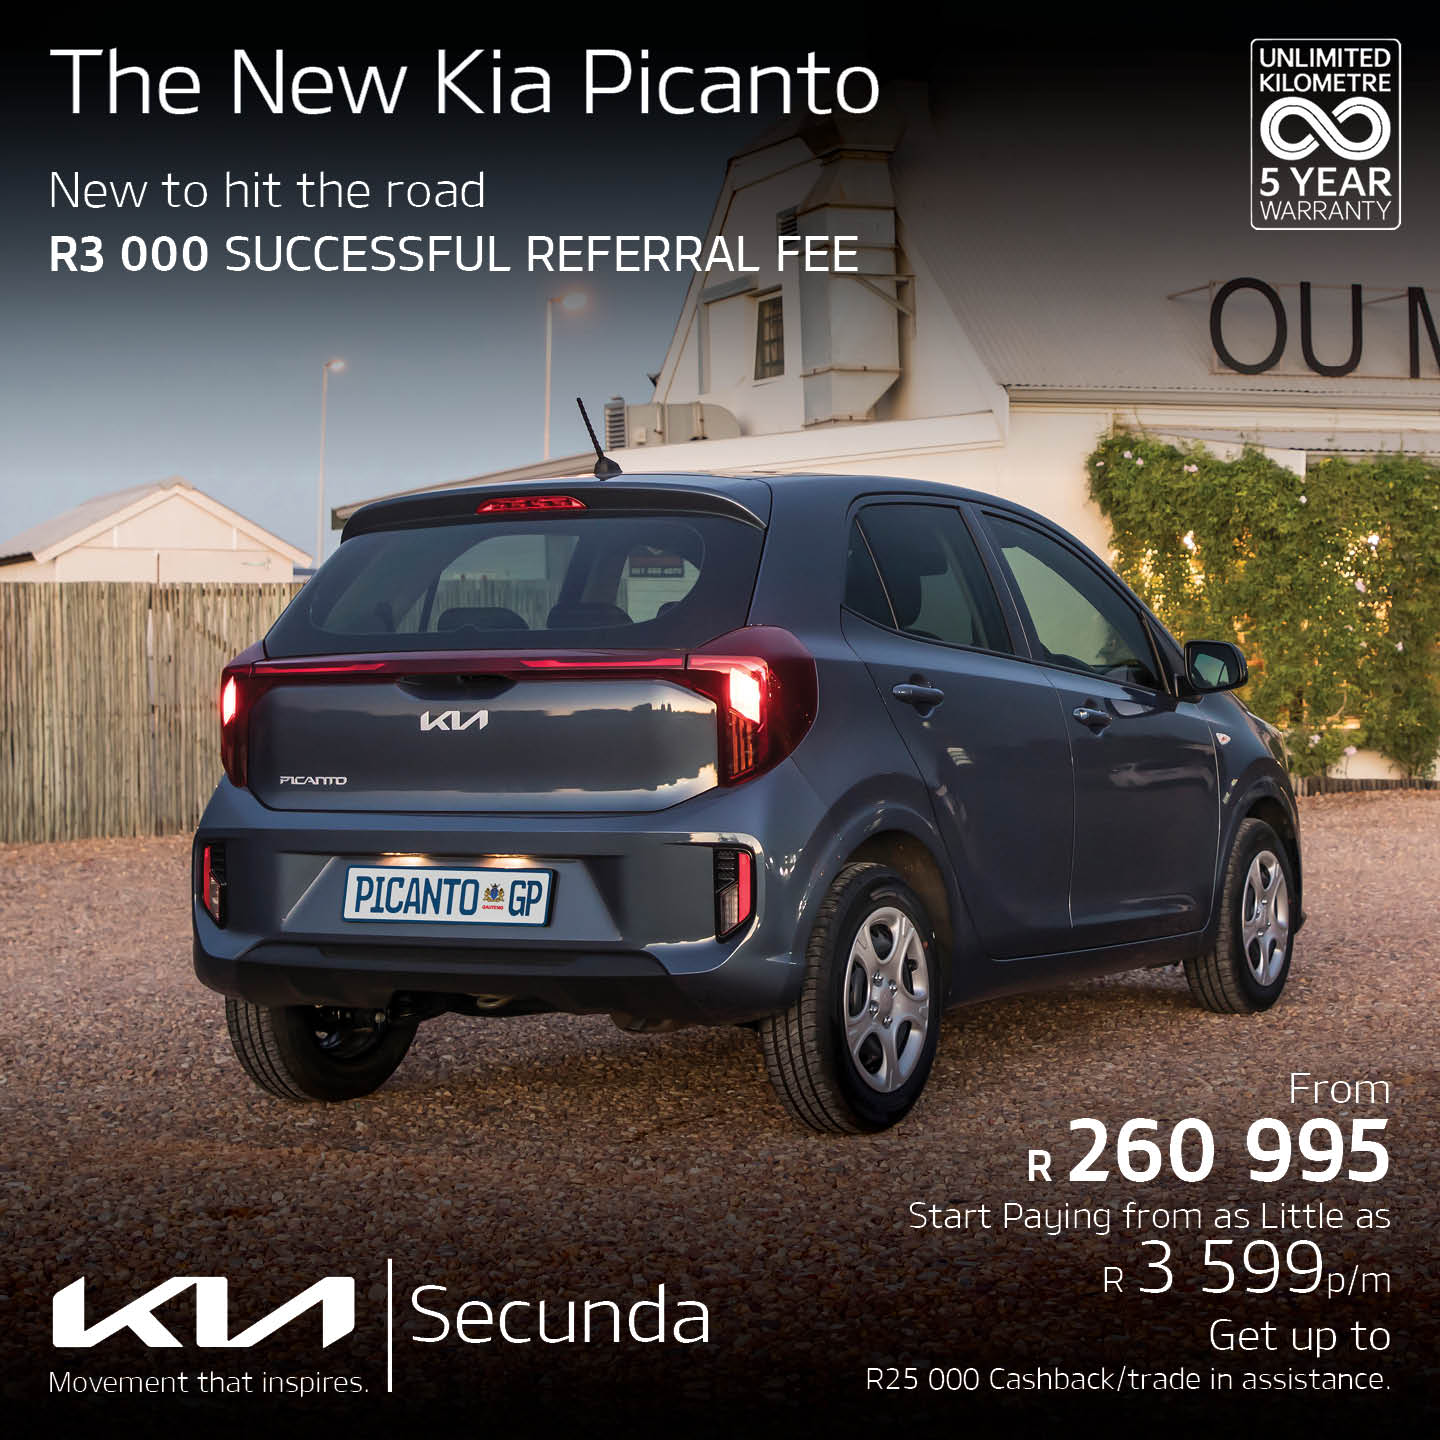 NEW to hit the road -The new KIA Picanto image from Eastvaal Motors